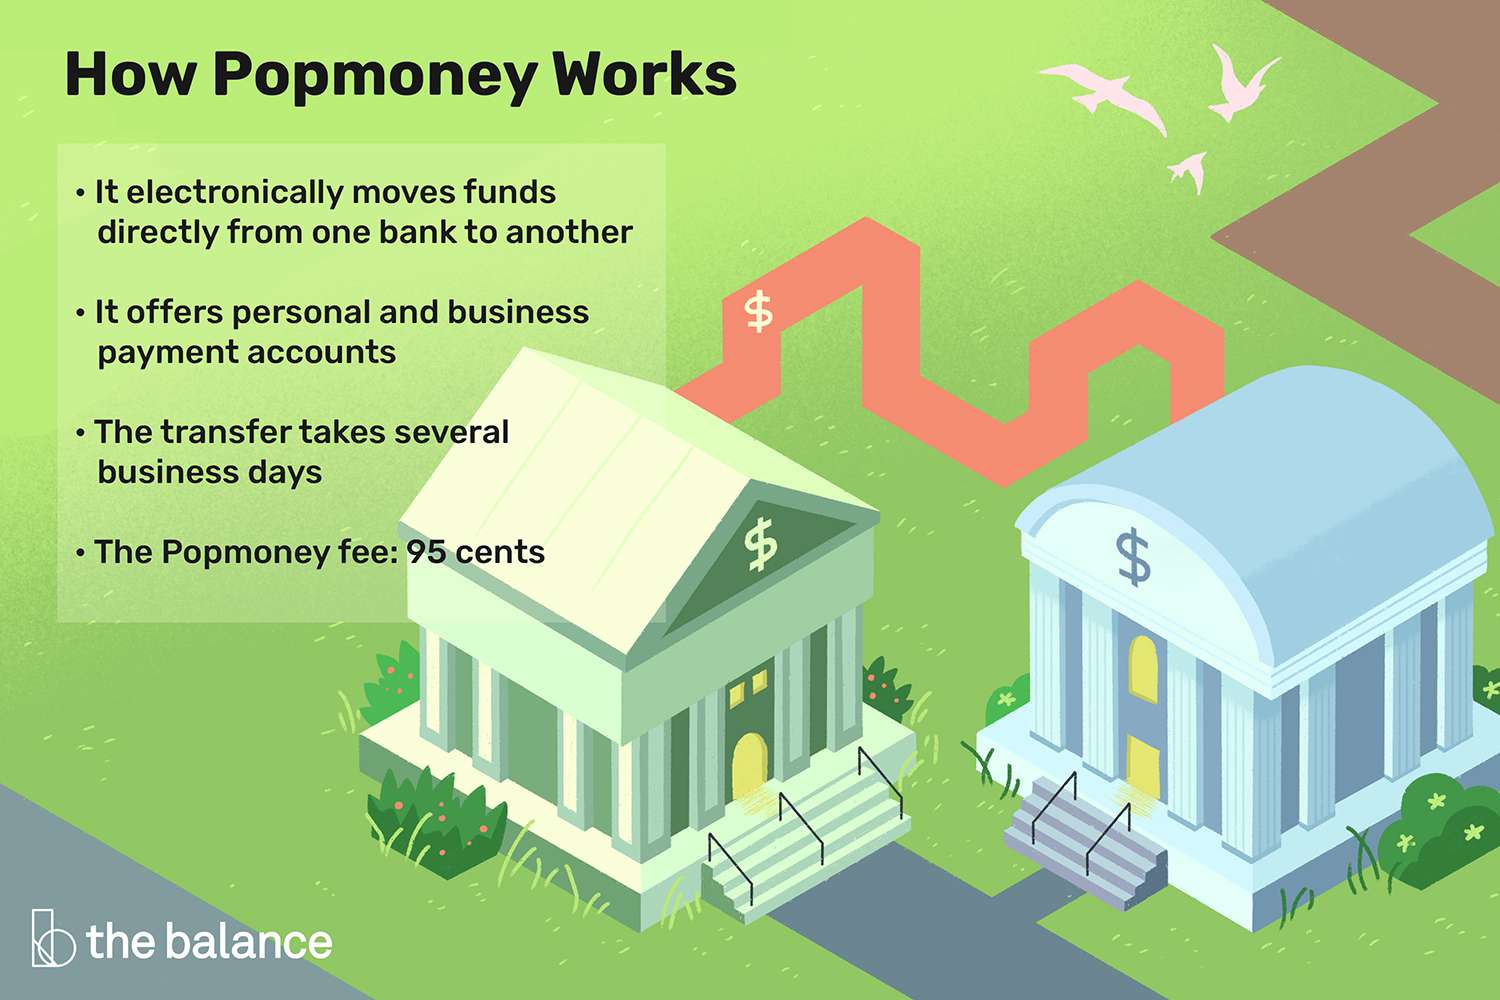 llustration of a bank transfering money to another bank, represents a headline that reads, "How Popmoney Works," and text that reads, "It electronically moves funds directly from one bank to another," "It offers personal and business payment accounts," "The transfer takes several business days," and "The Popmoney fee: 95 cents."